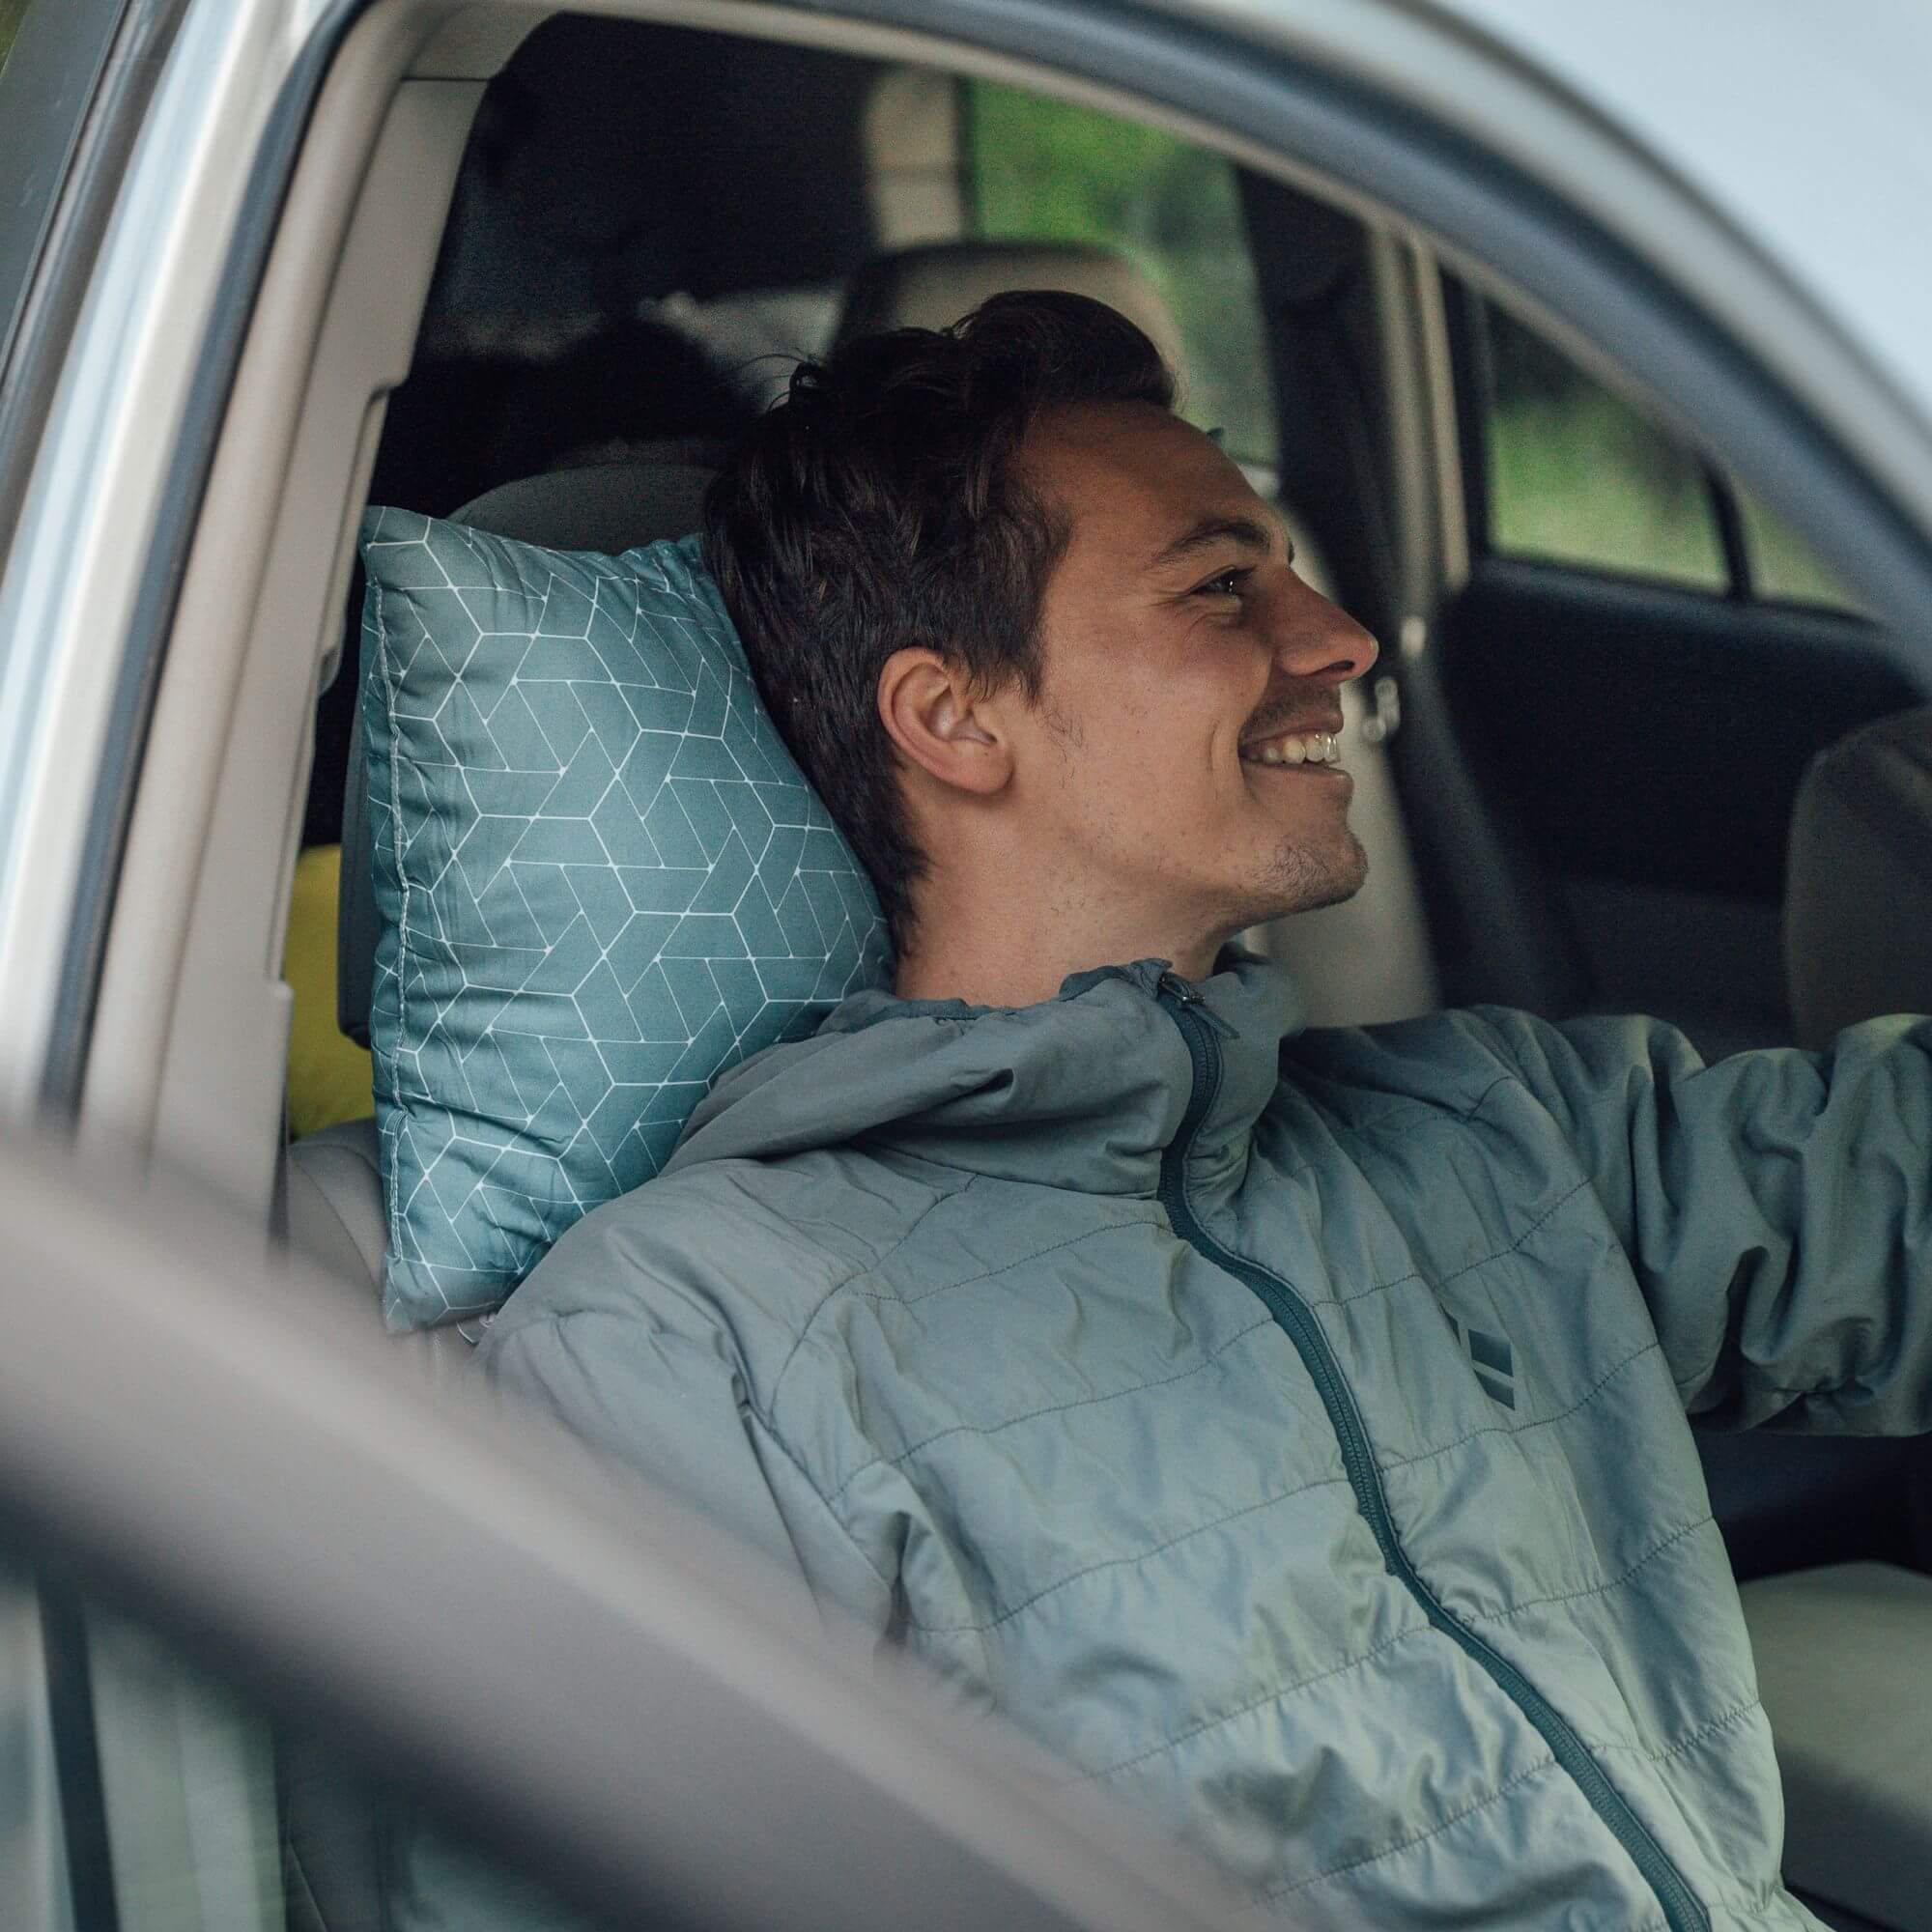 Coast Travel Pillow, Teal, Lifestyle Man Leaning on Pillow in a Car